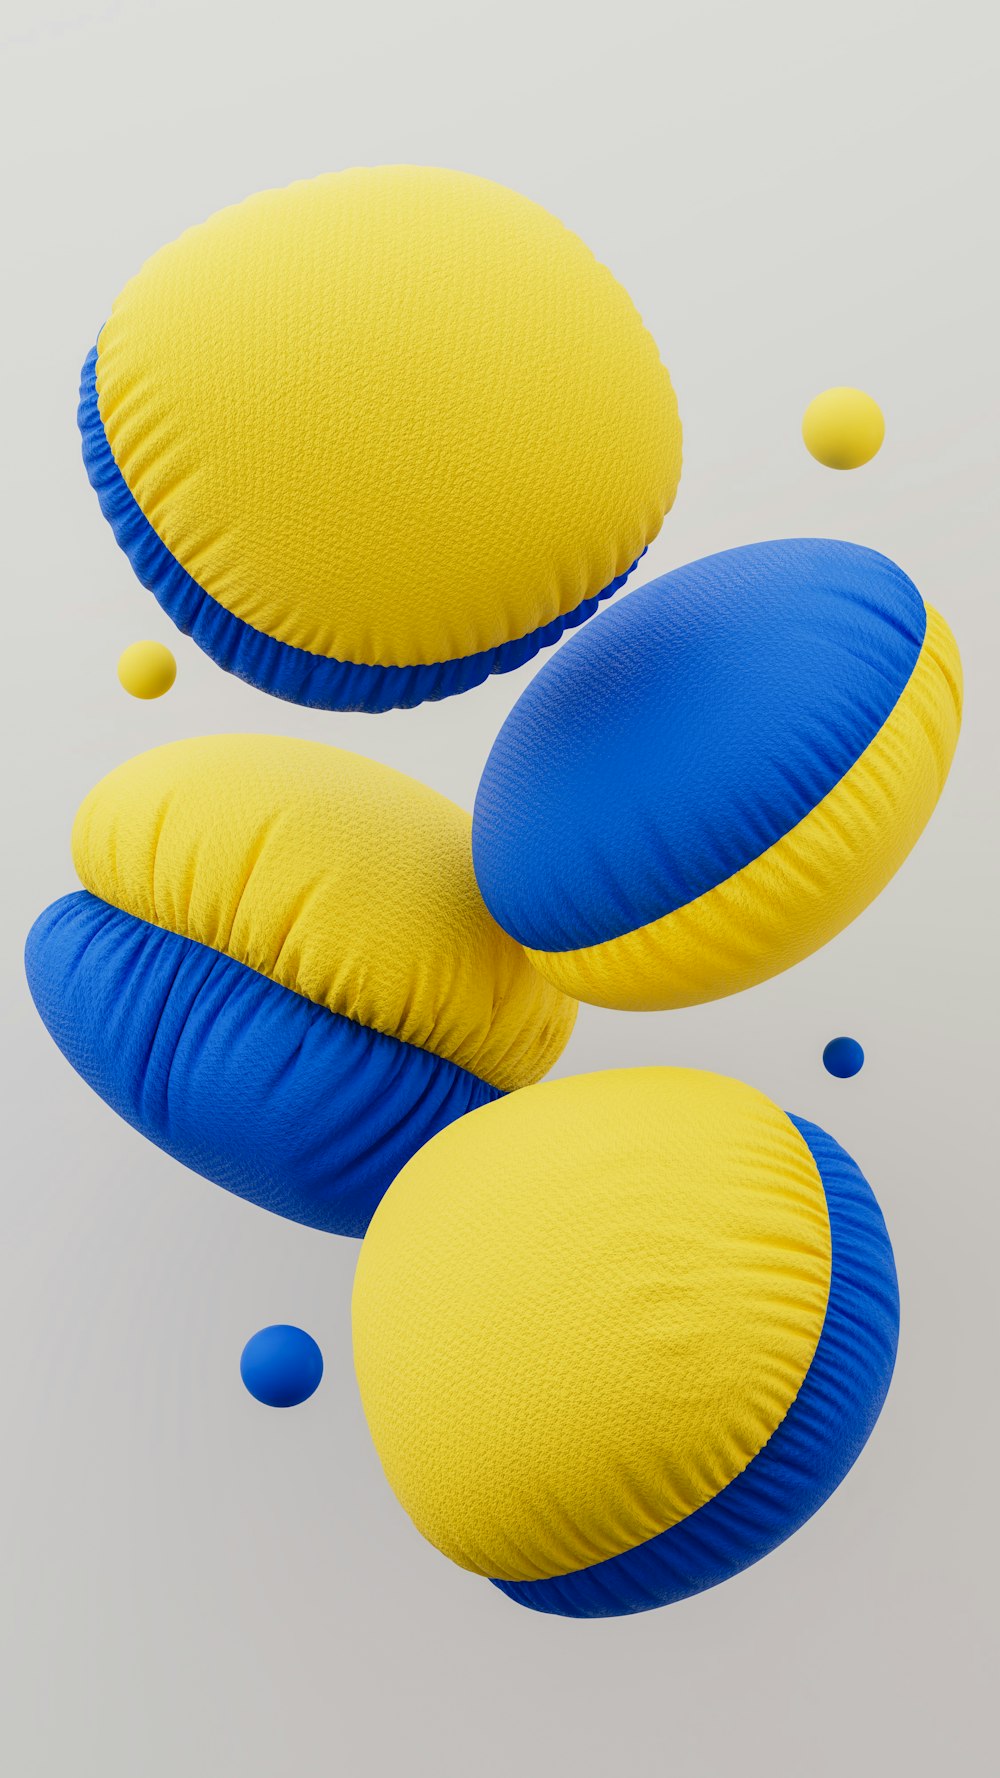 three yellow and blue pillows floating in the air